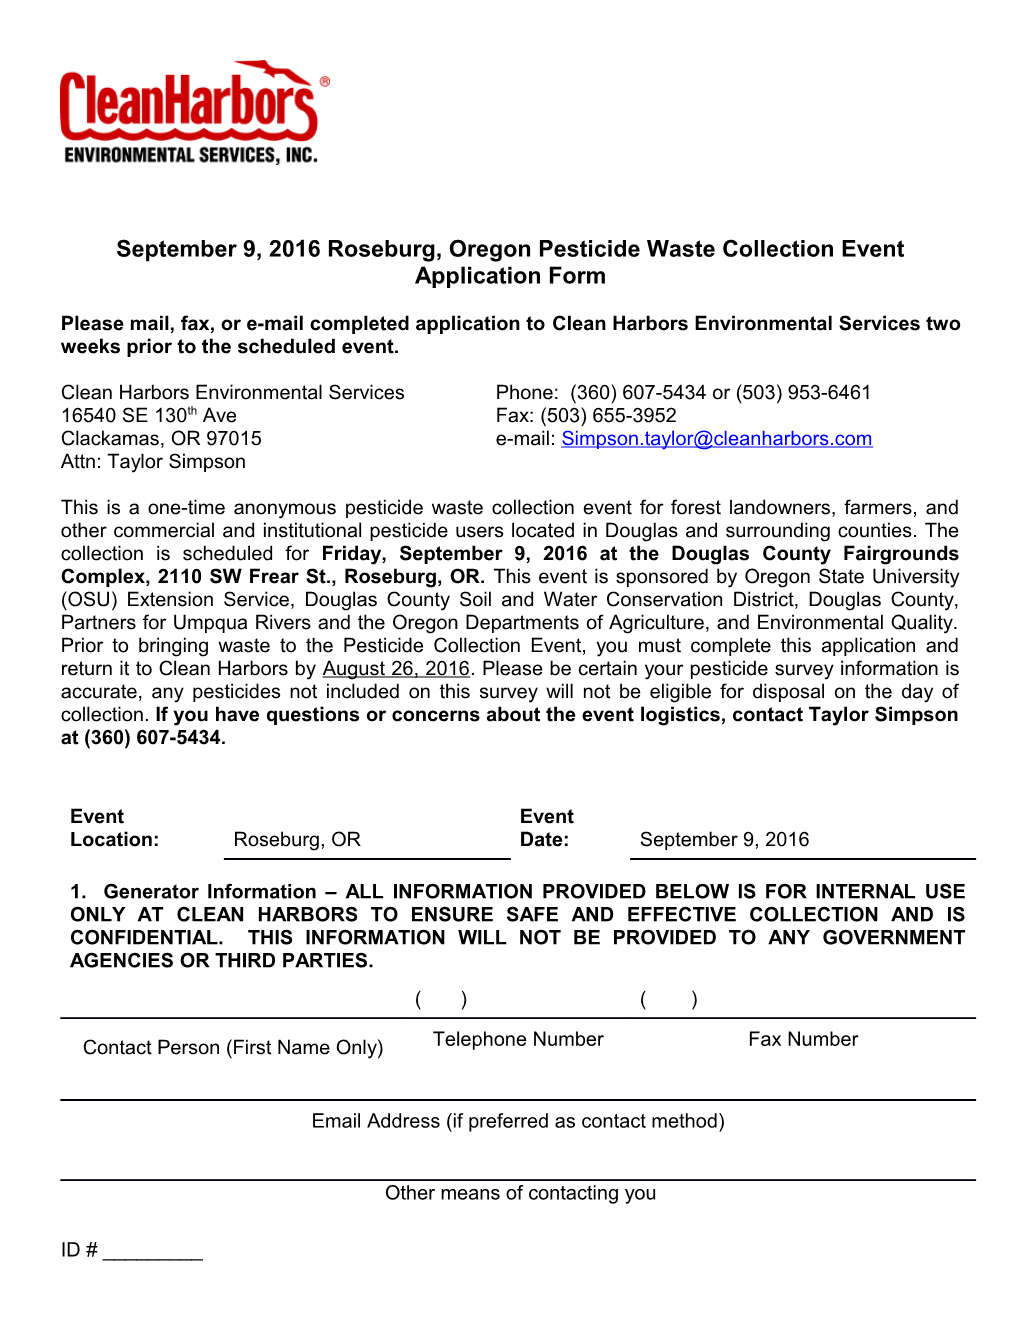 Waste Collection Event Application Form for Conditionally Exempt Hazardous Waste Generators